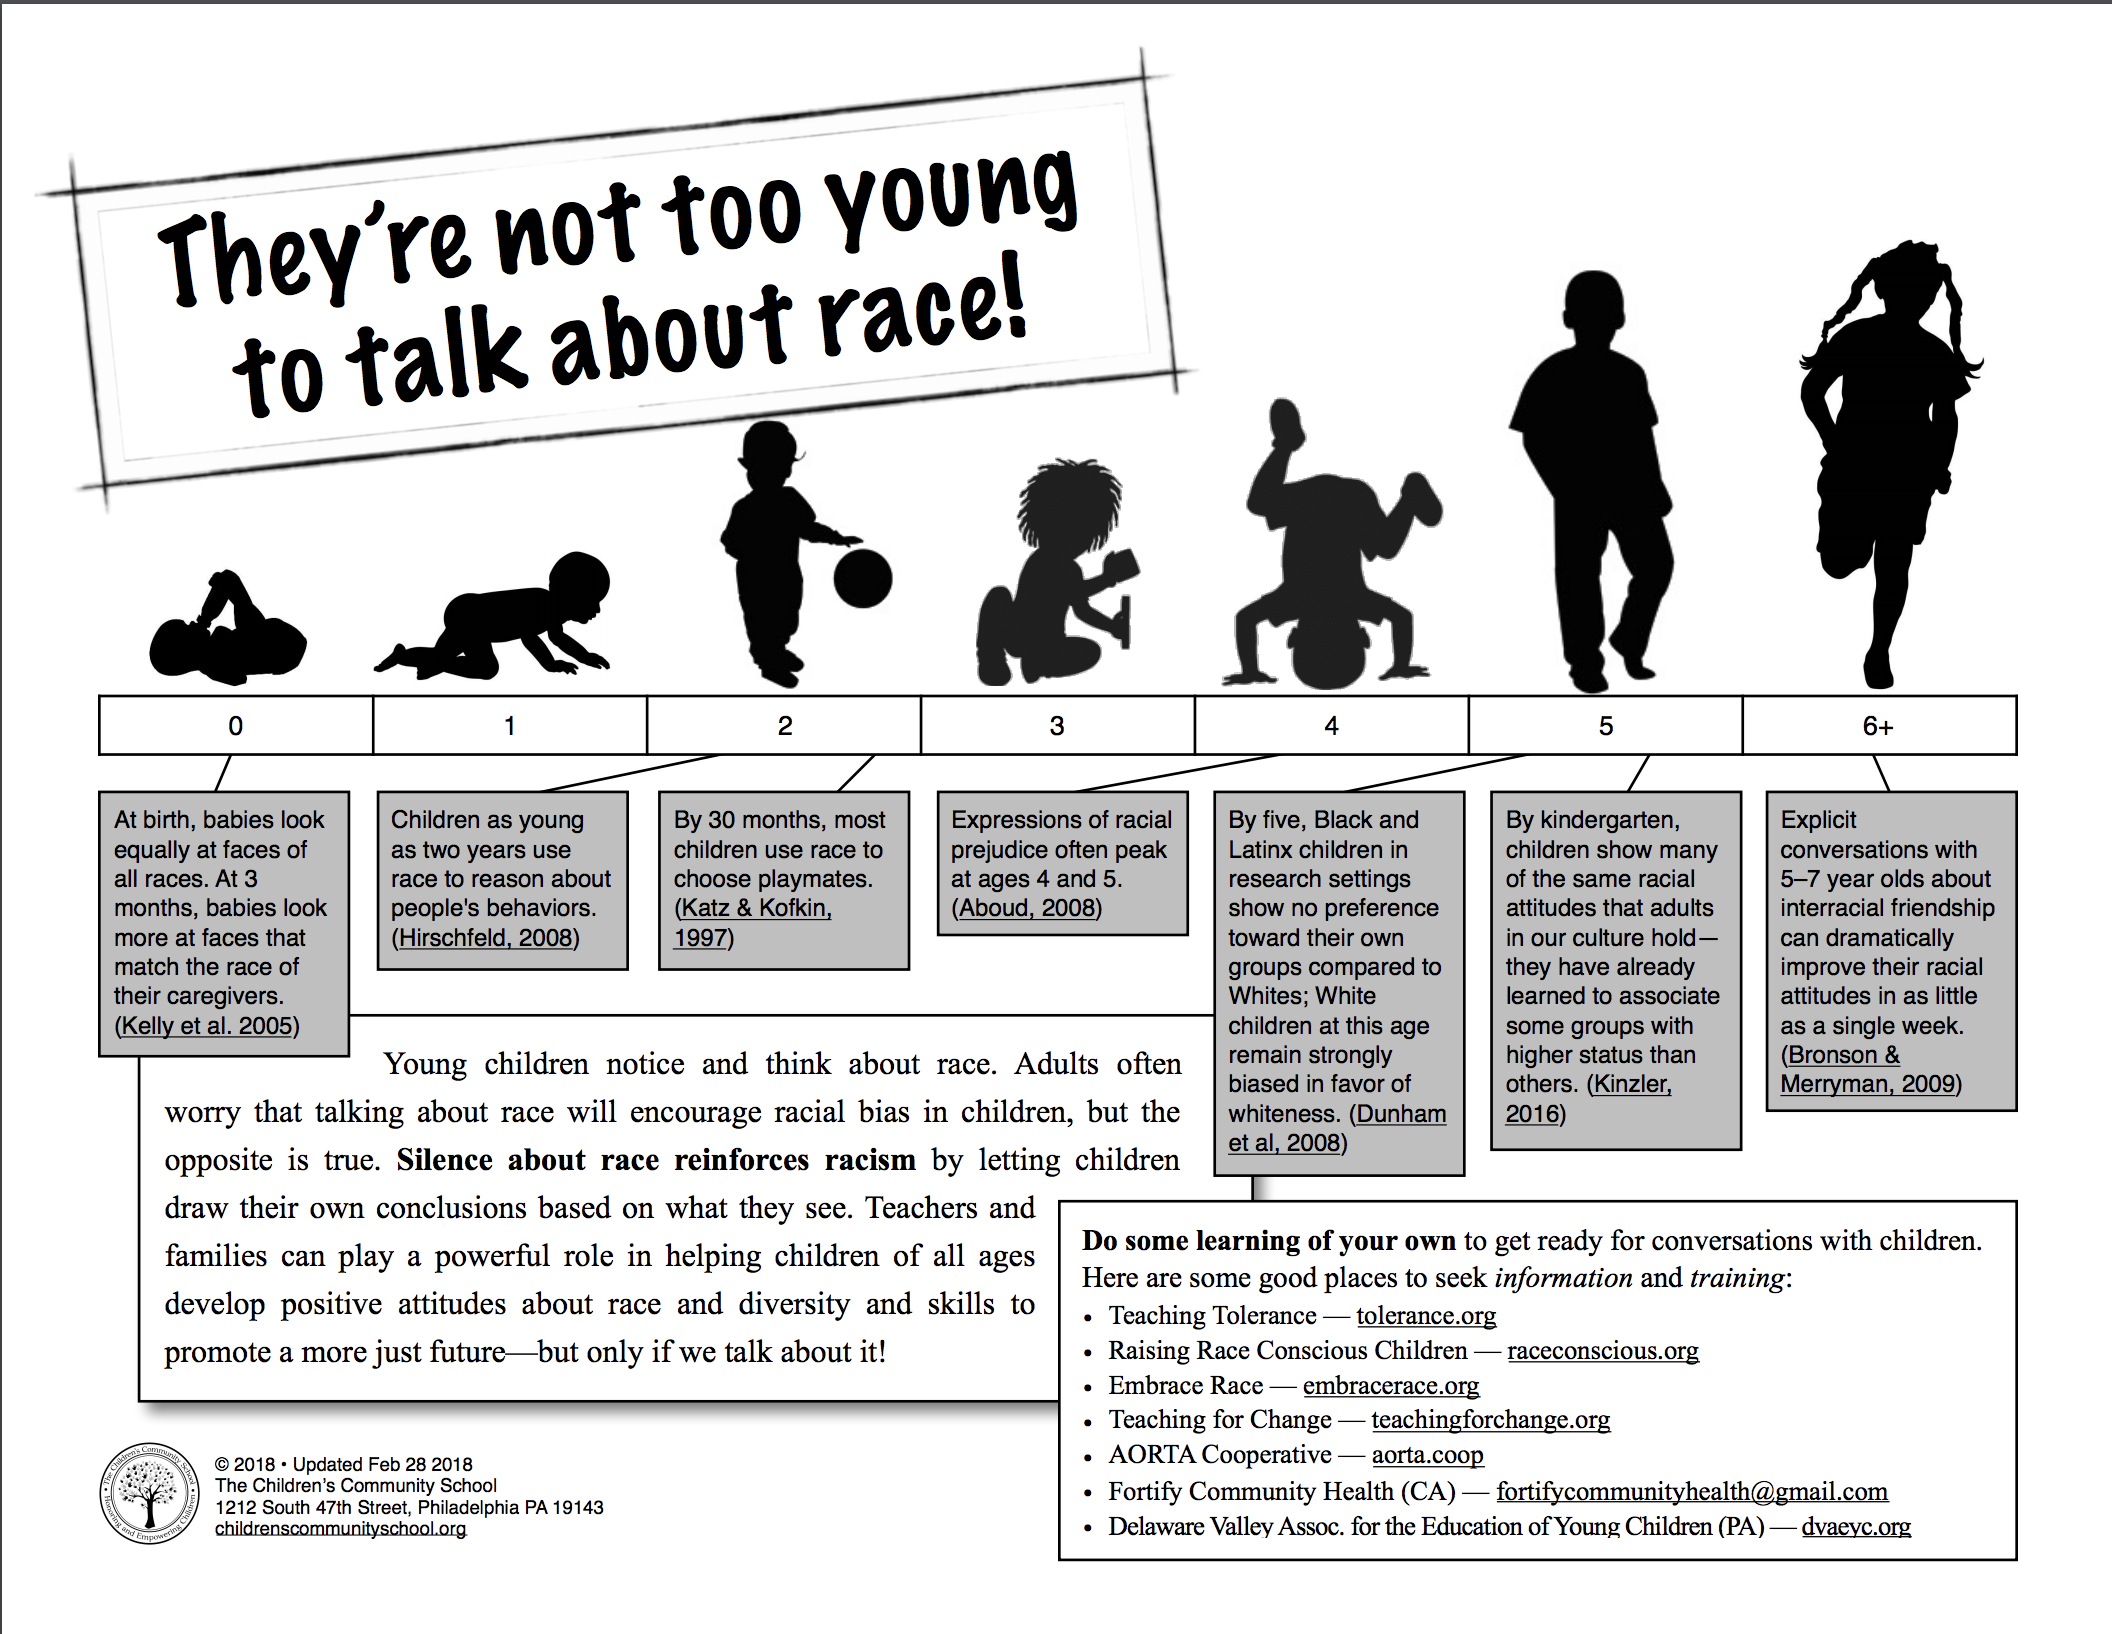 They're not too young to talk about race!